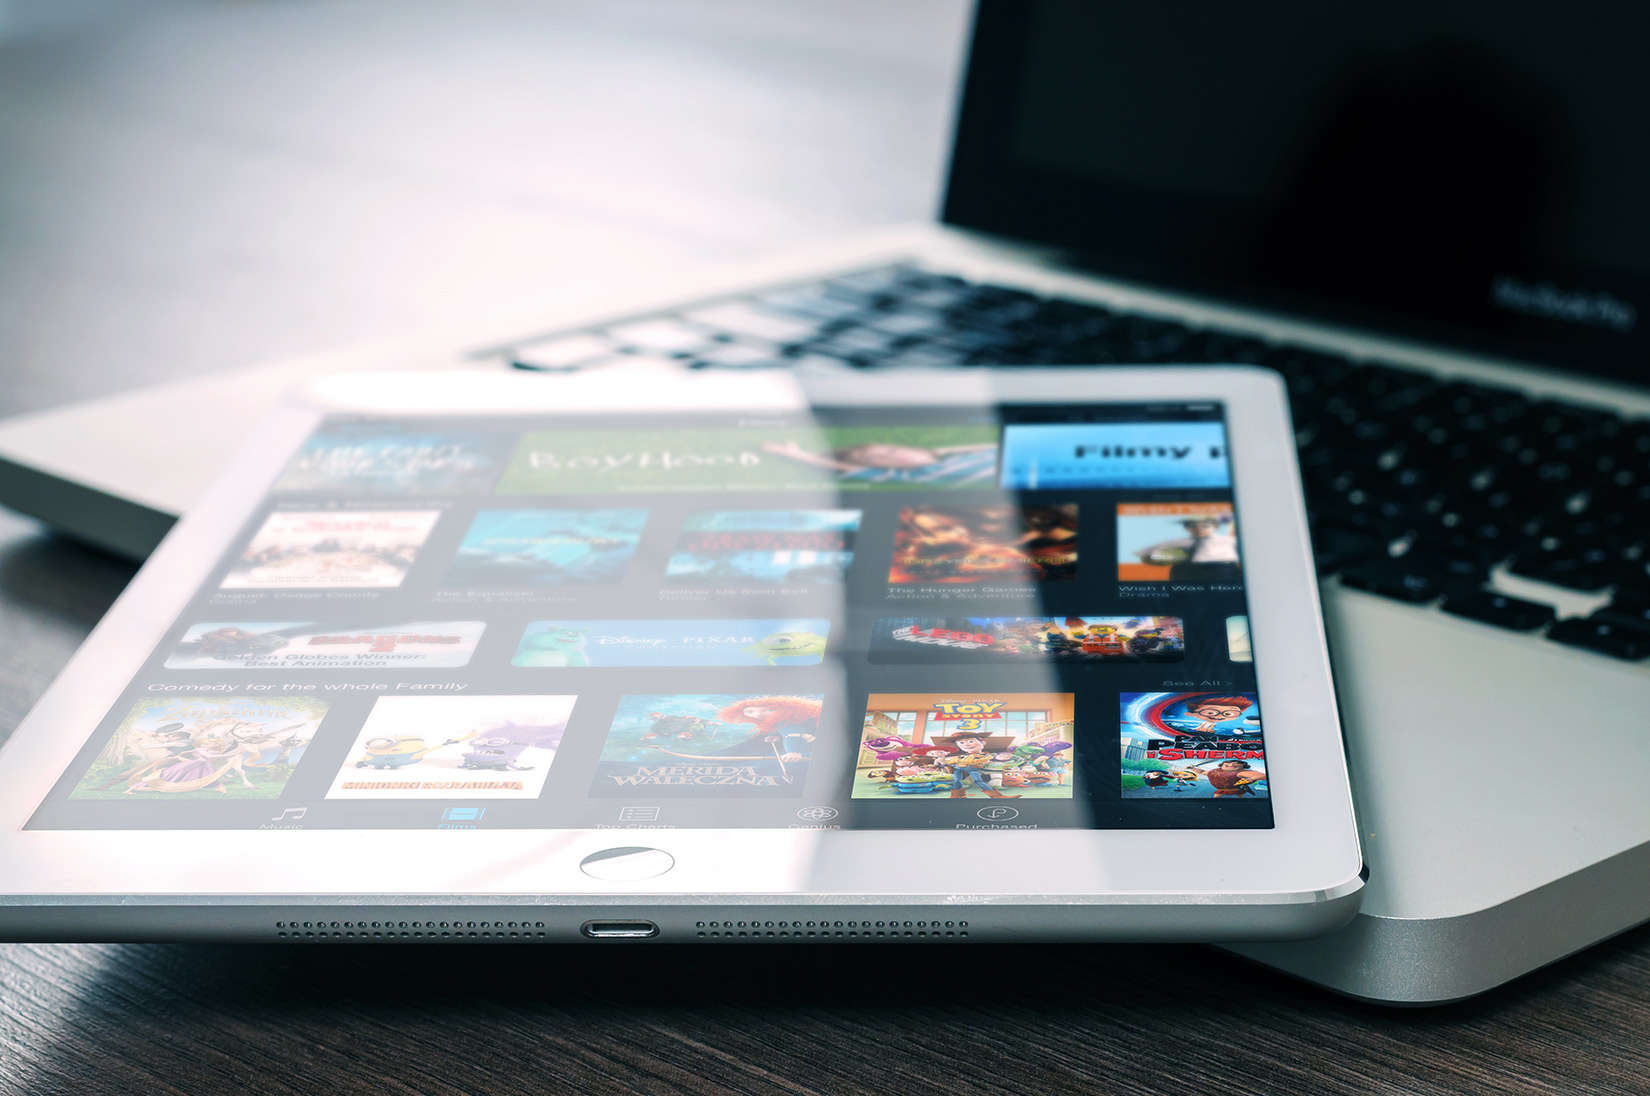 Apple wants a deal with studio execs to bring high-priced movie rentals to iTunes within days of release.